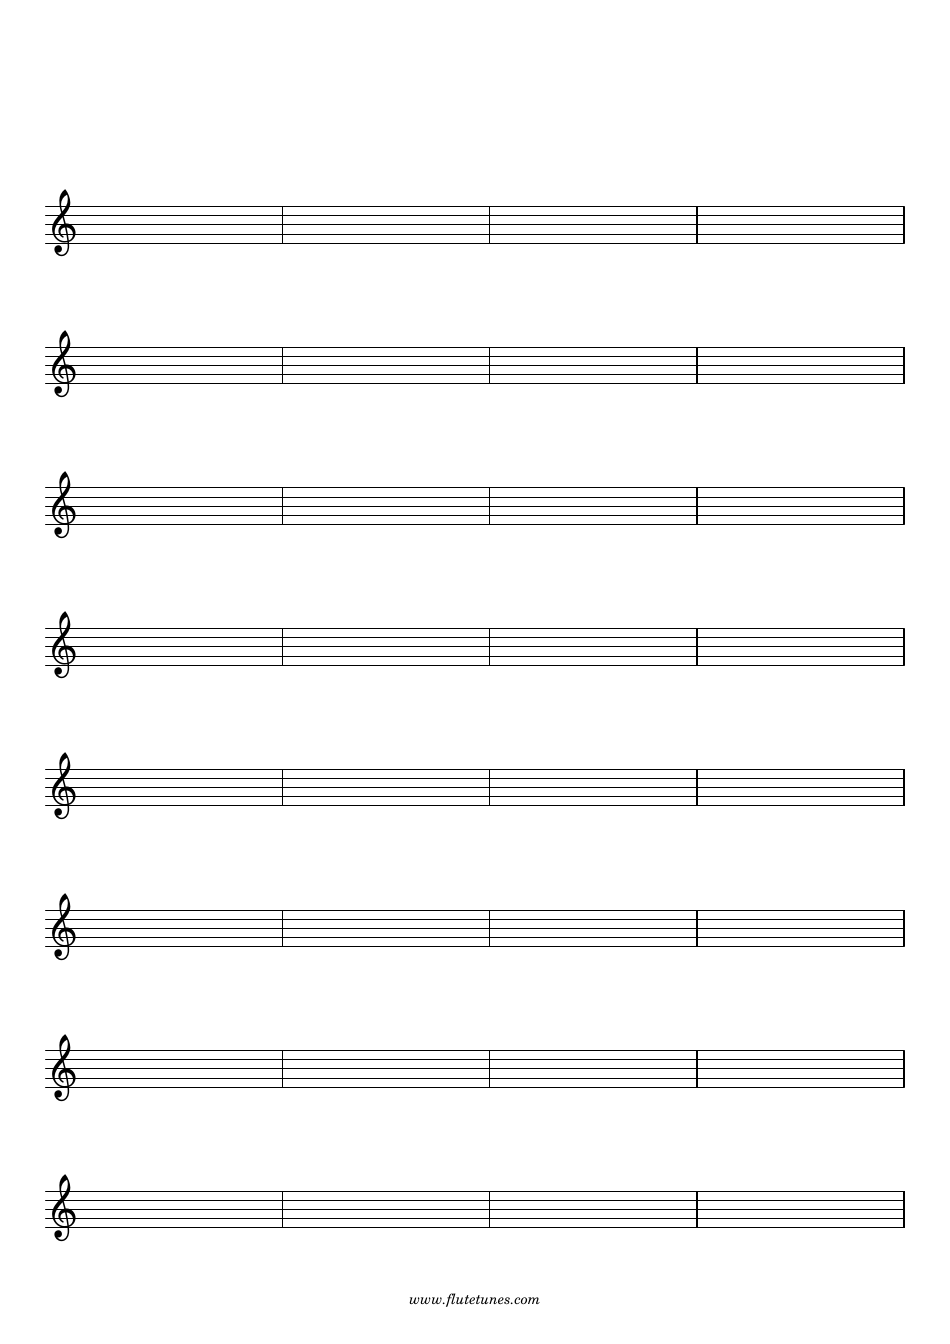 blank-staff-paper-8-staves-32-bars-treble-clef-download-printable